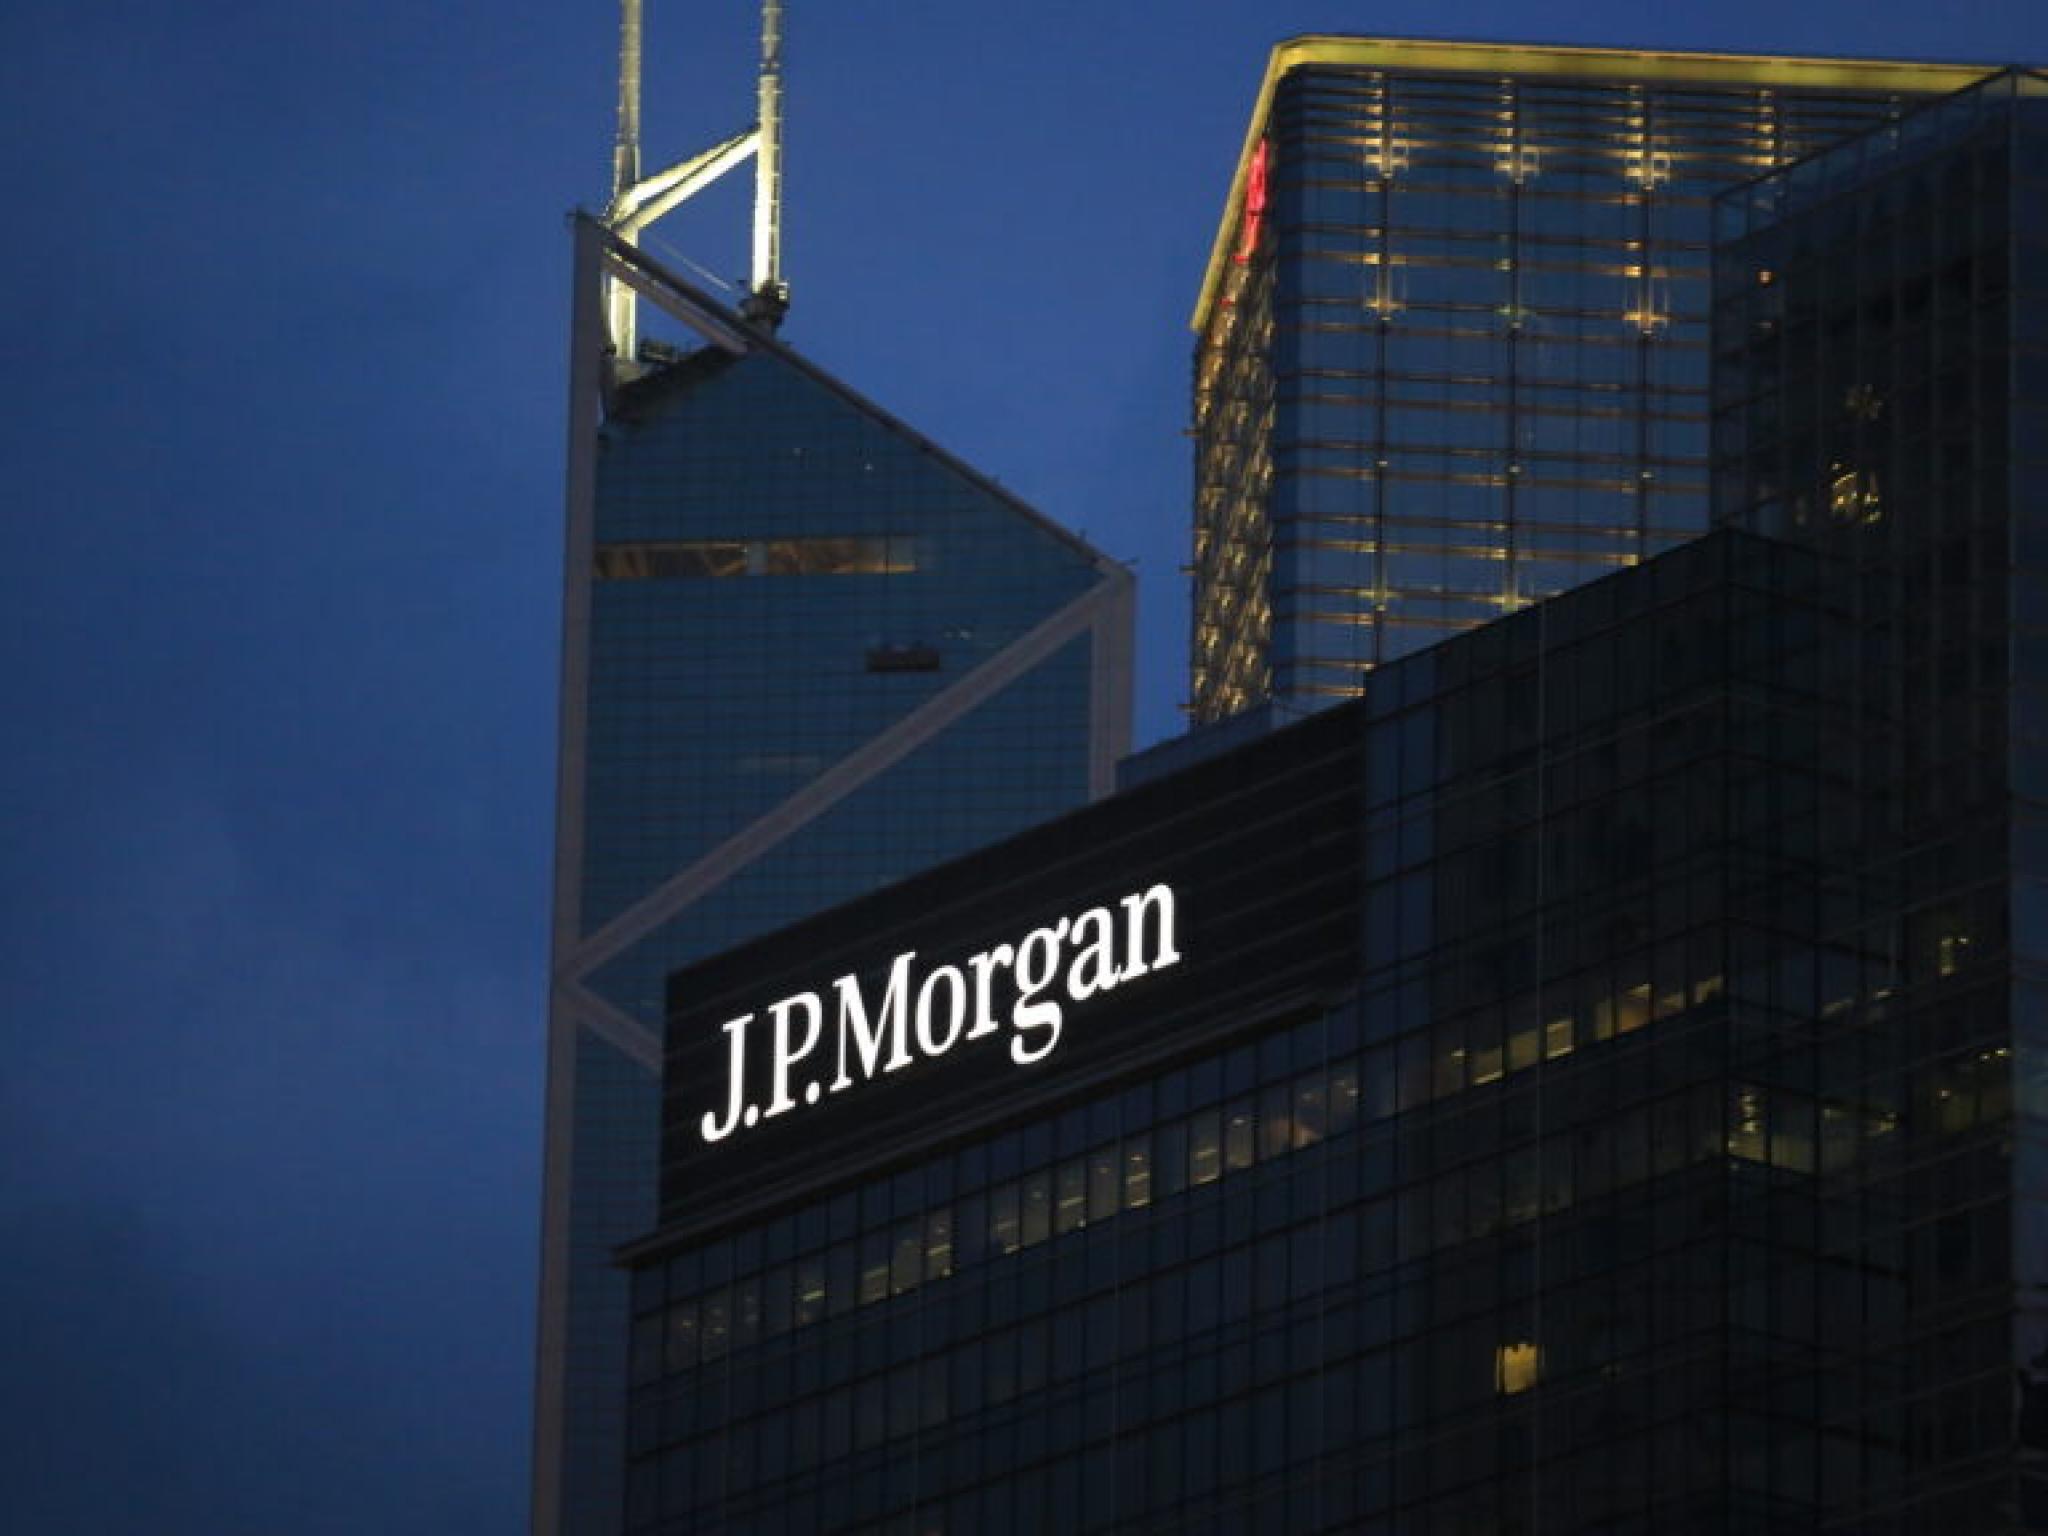  jpmorgan-attracts-over-15b-in-tax-strategy-business-from-wealthy-clients-as-it-looks-to-catch-up-to-rivals-report 